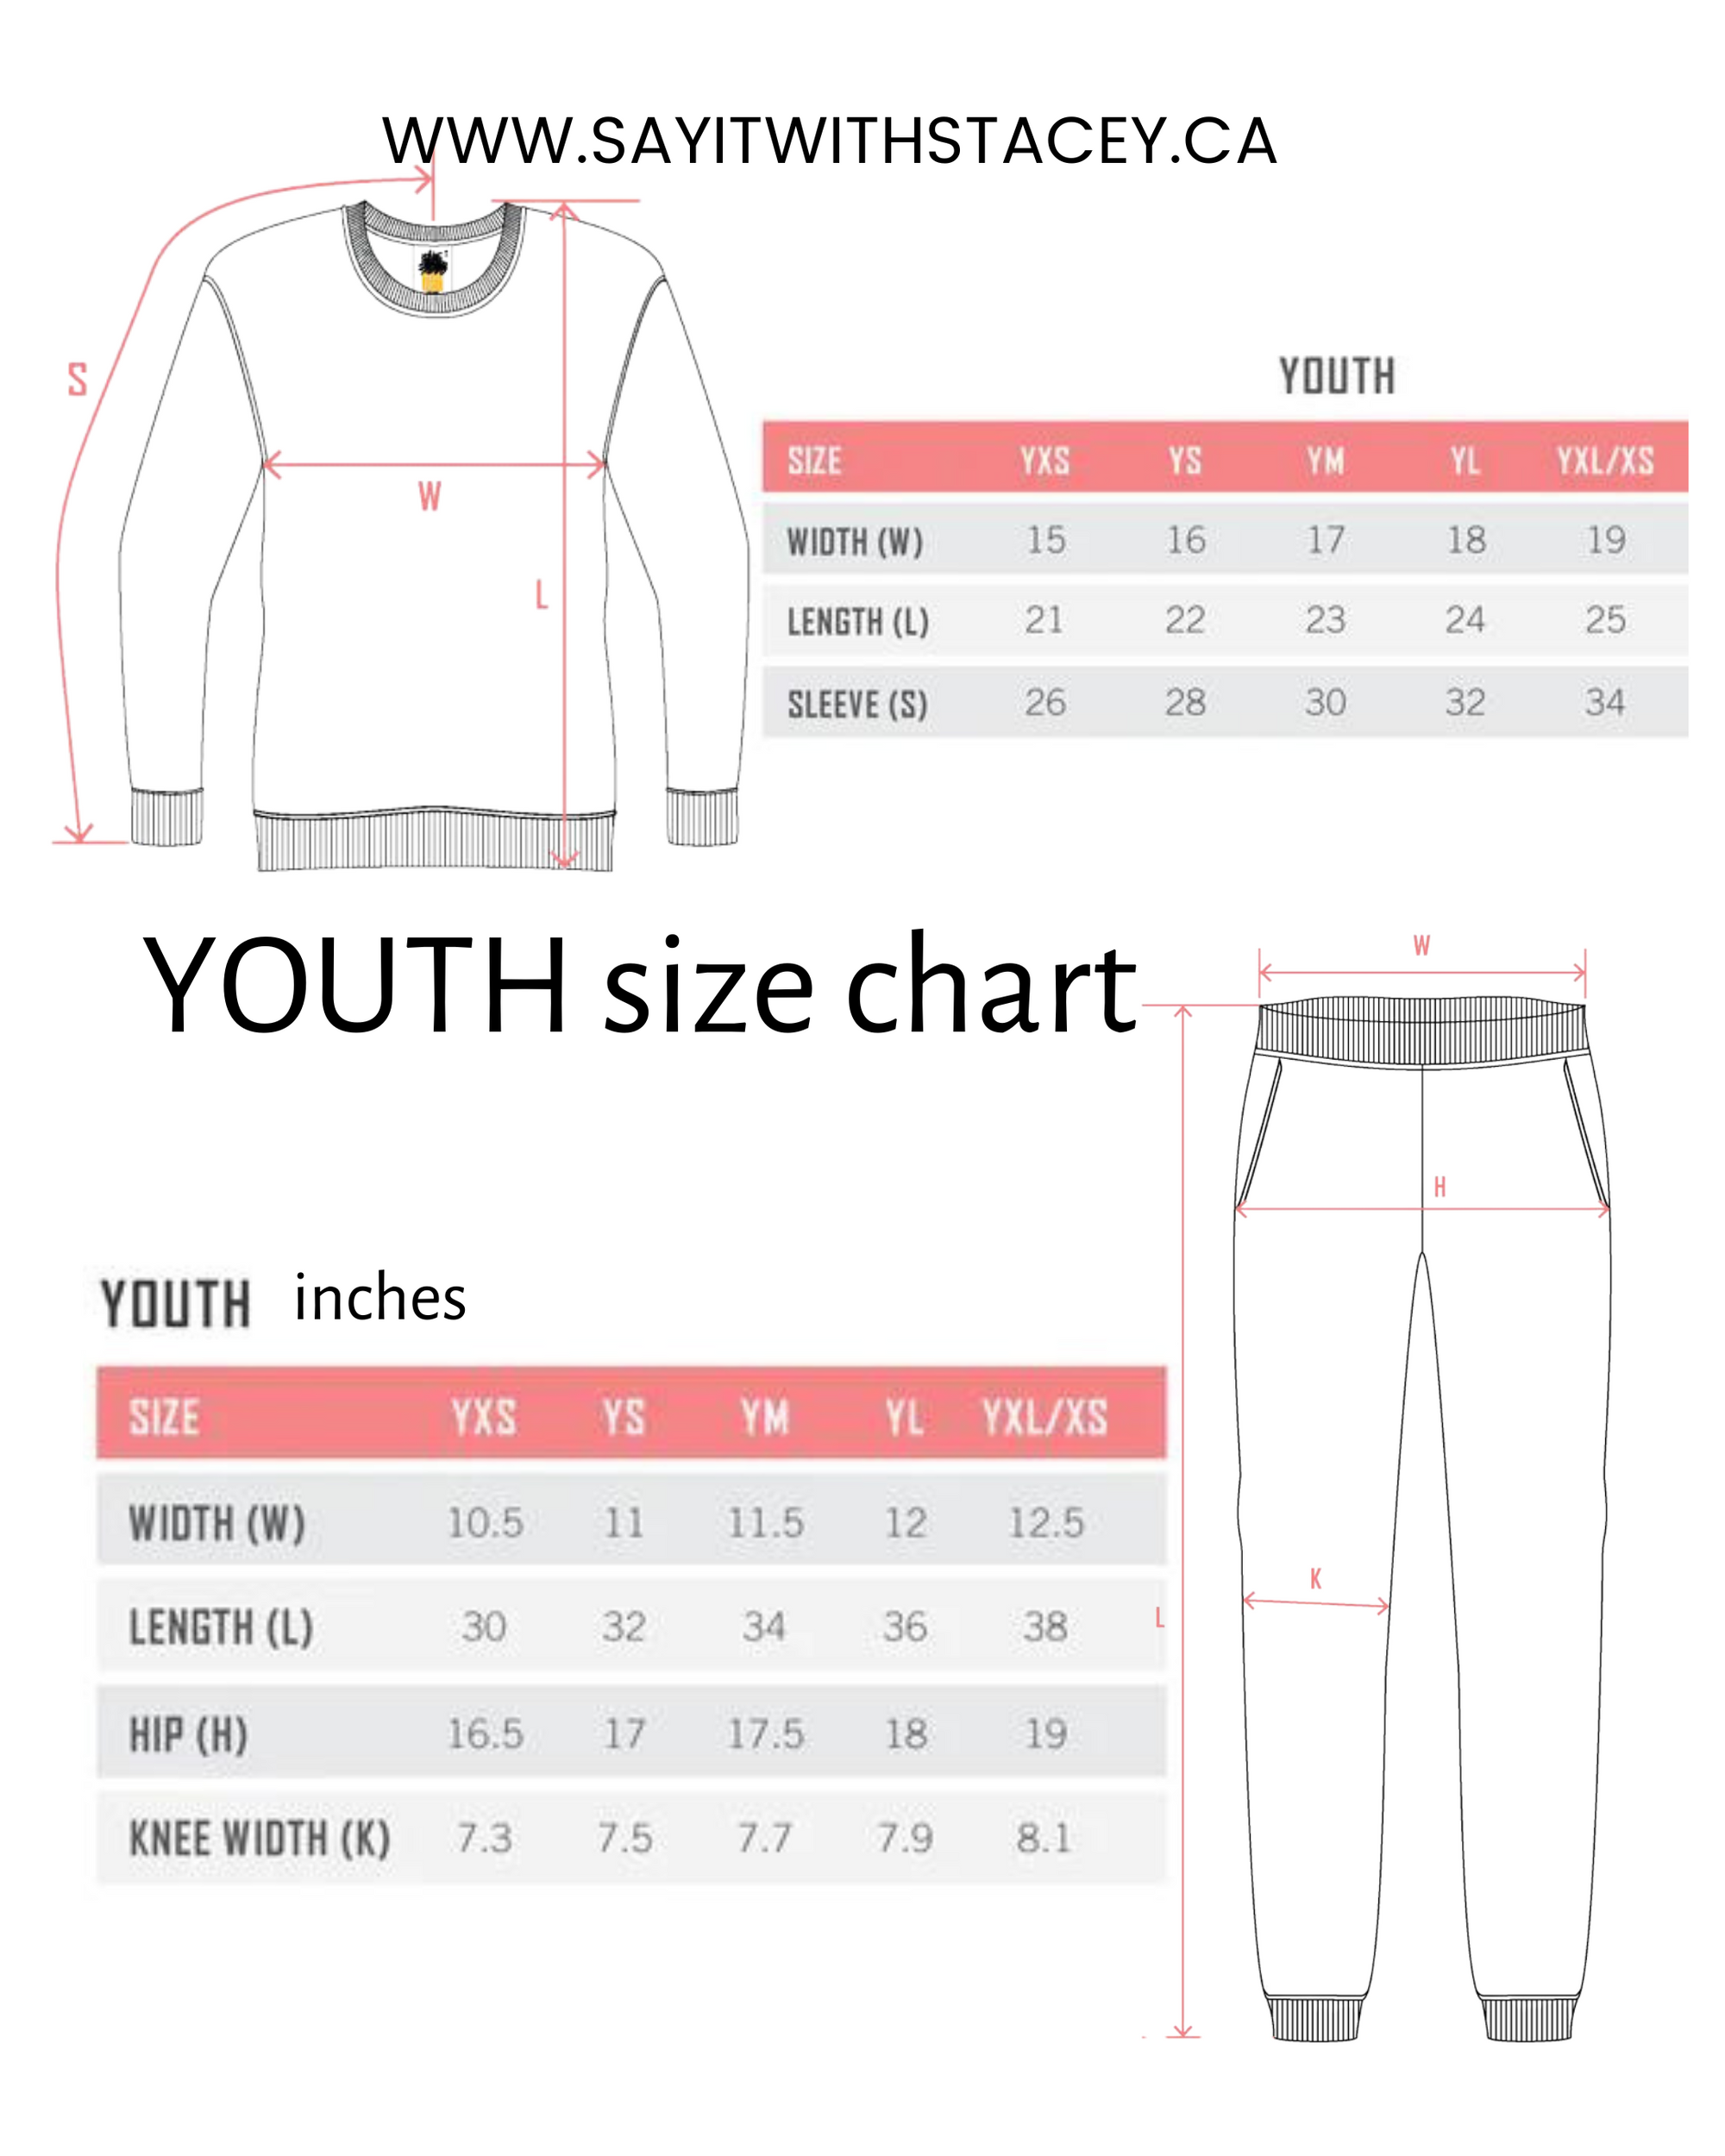 Say it with Stacey Youth Size chart 